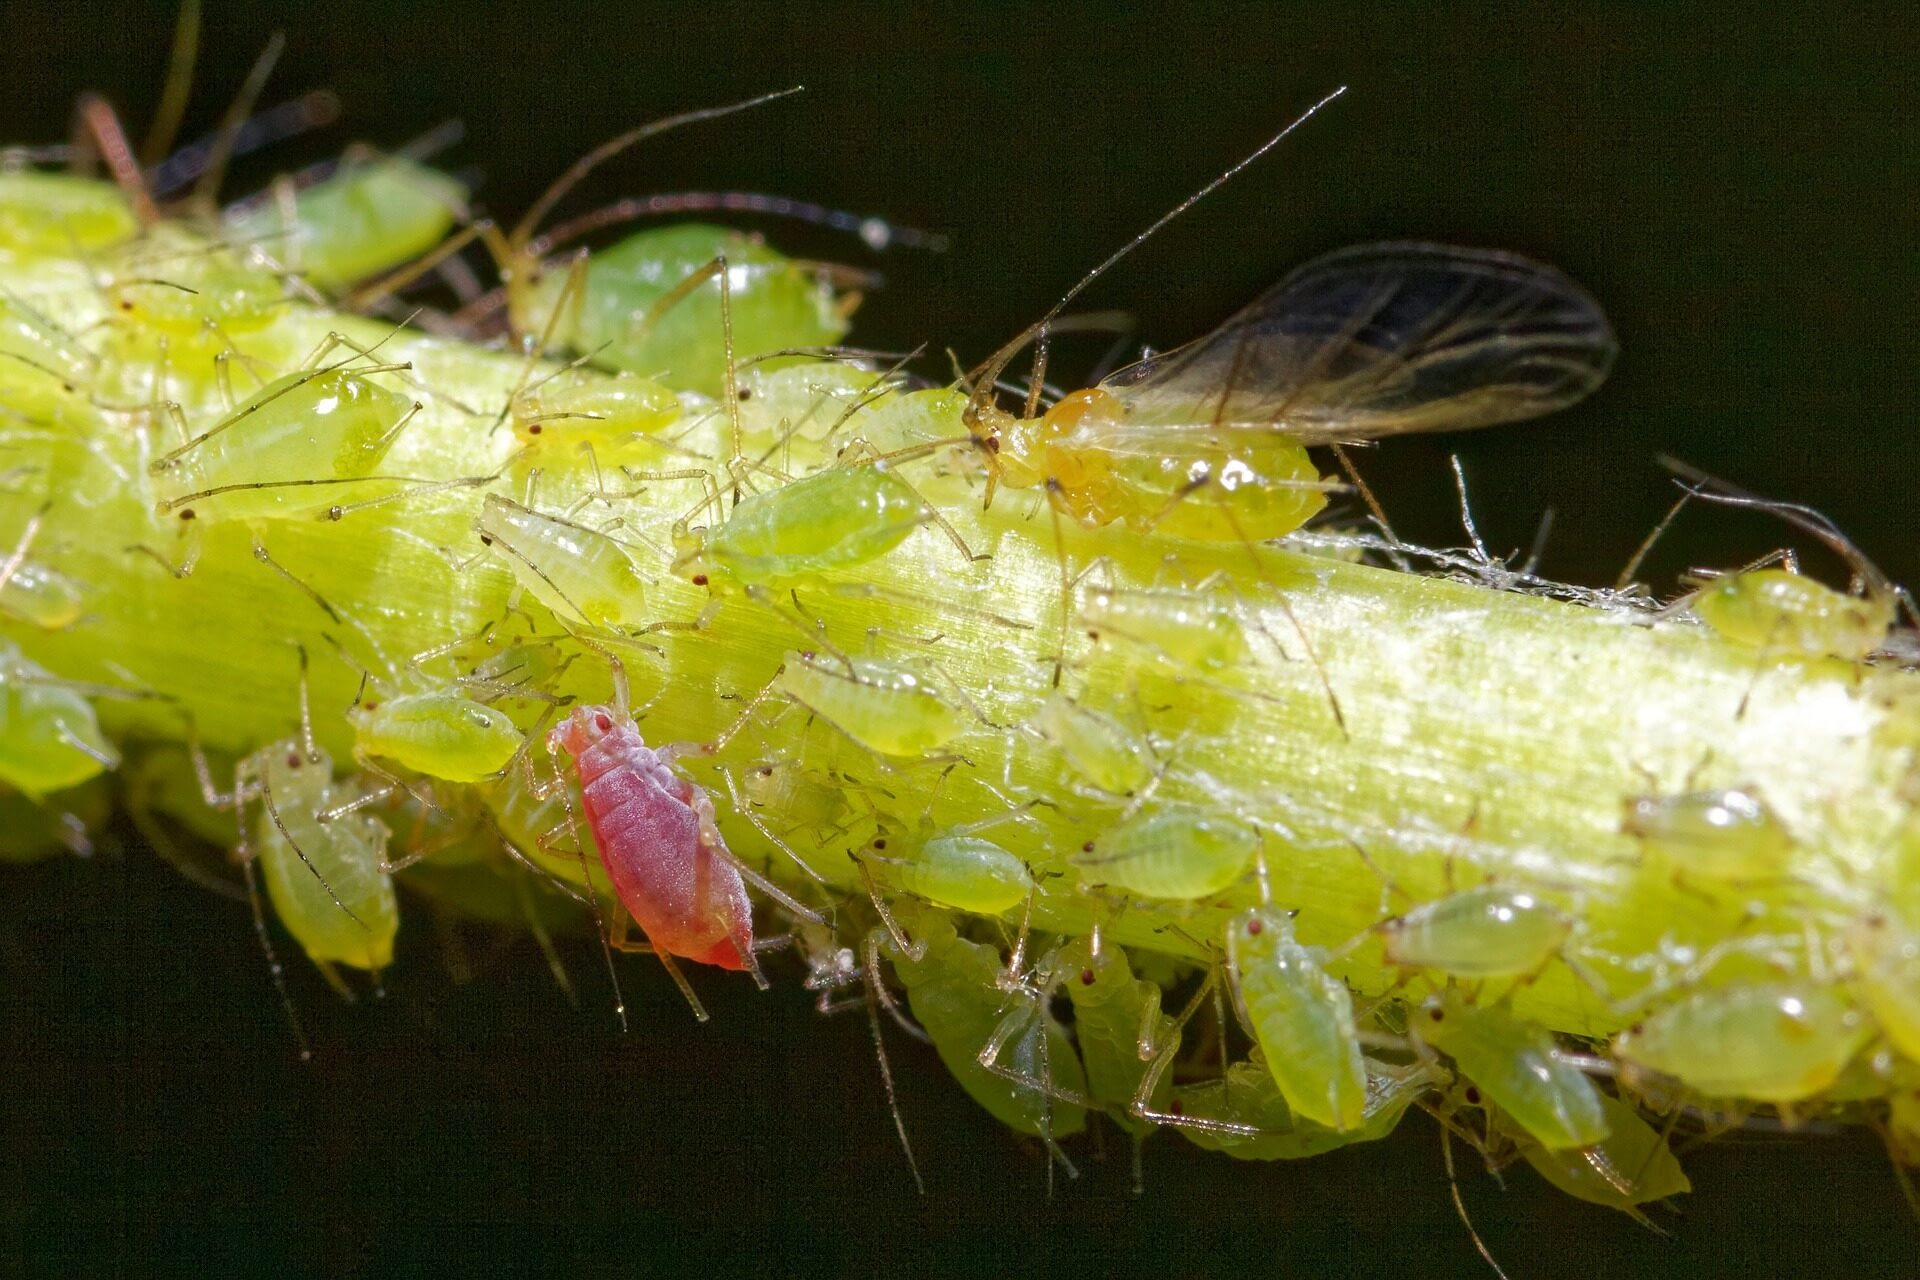 Image: Stem with aphids on it